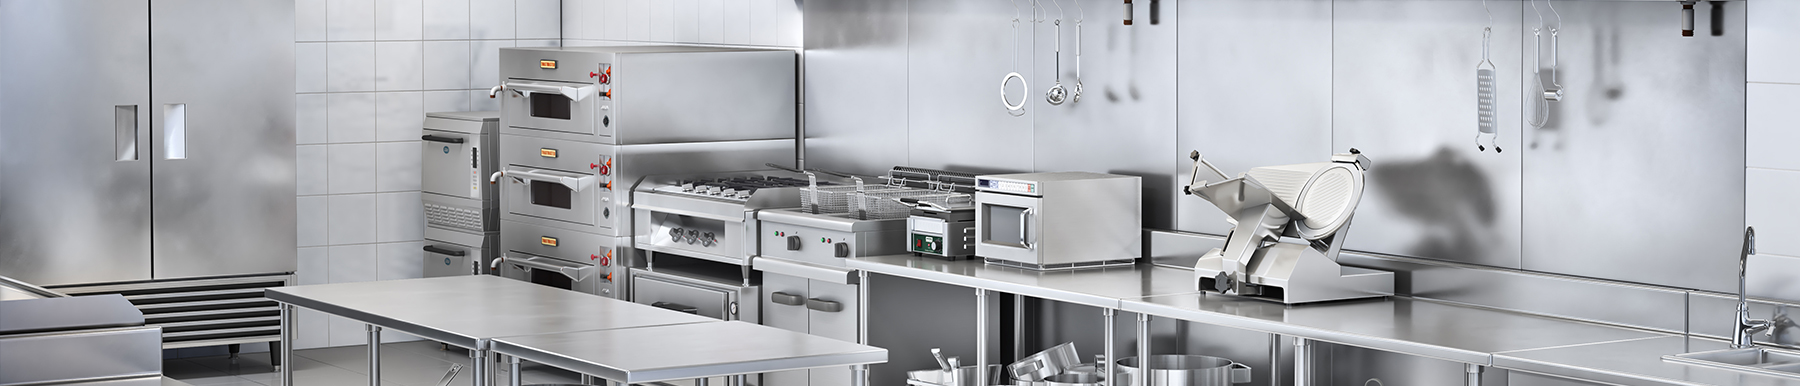 Catering Equipment Suppliers Near Stoke-on-Trent | H2 Catering Equipment Catering Equipment